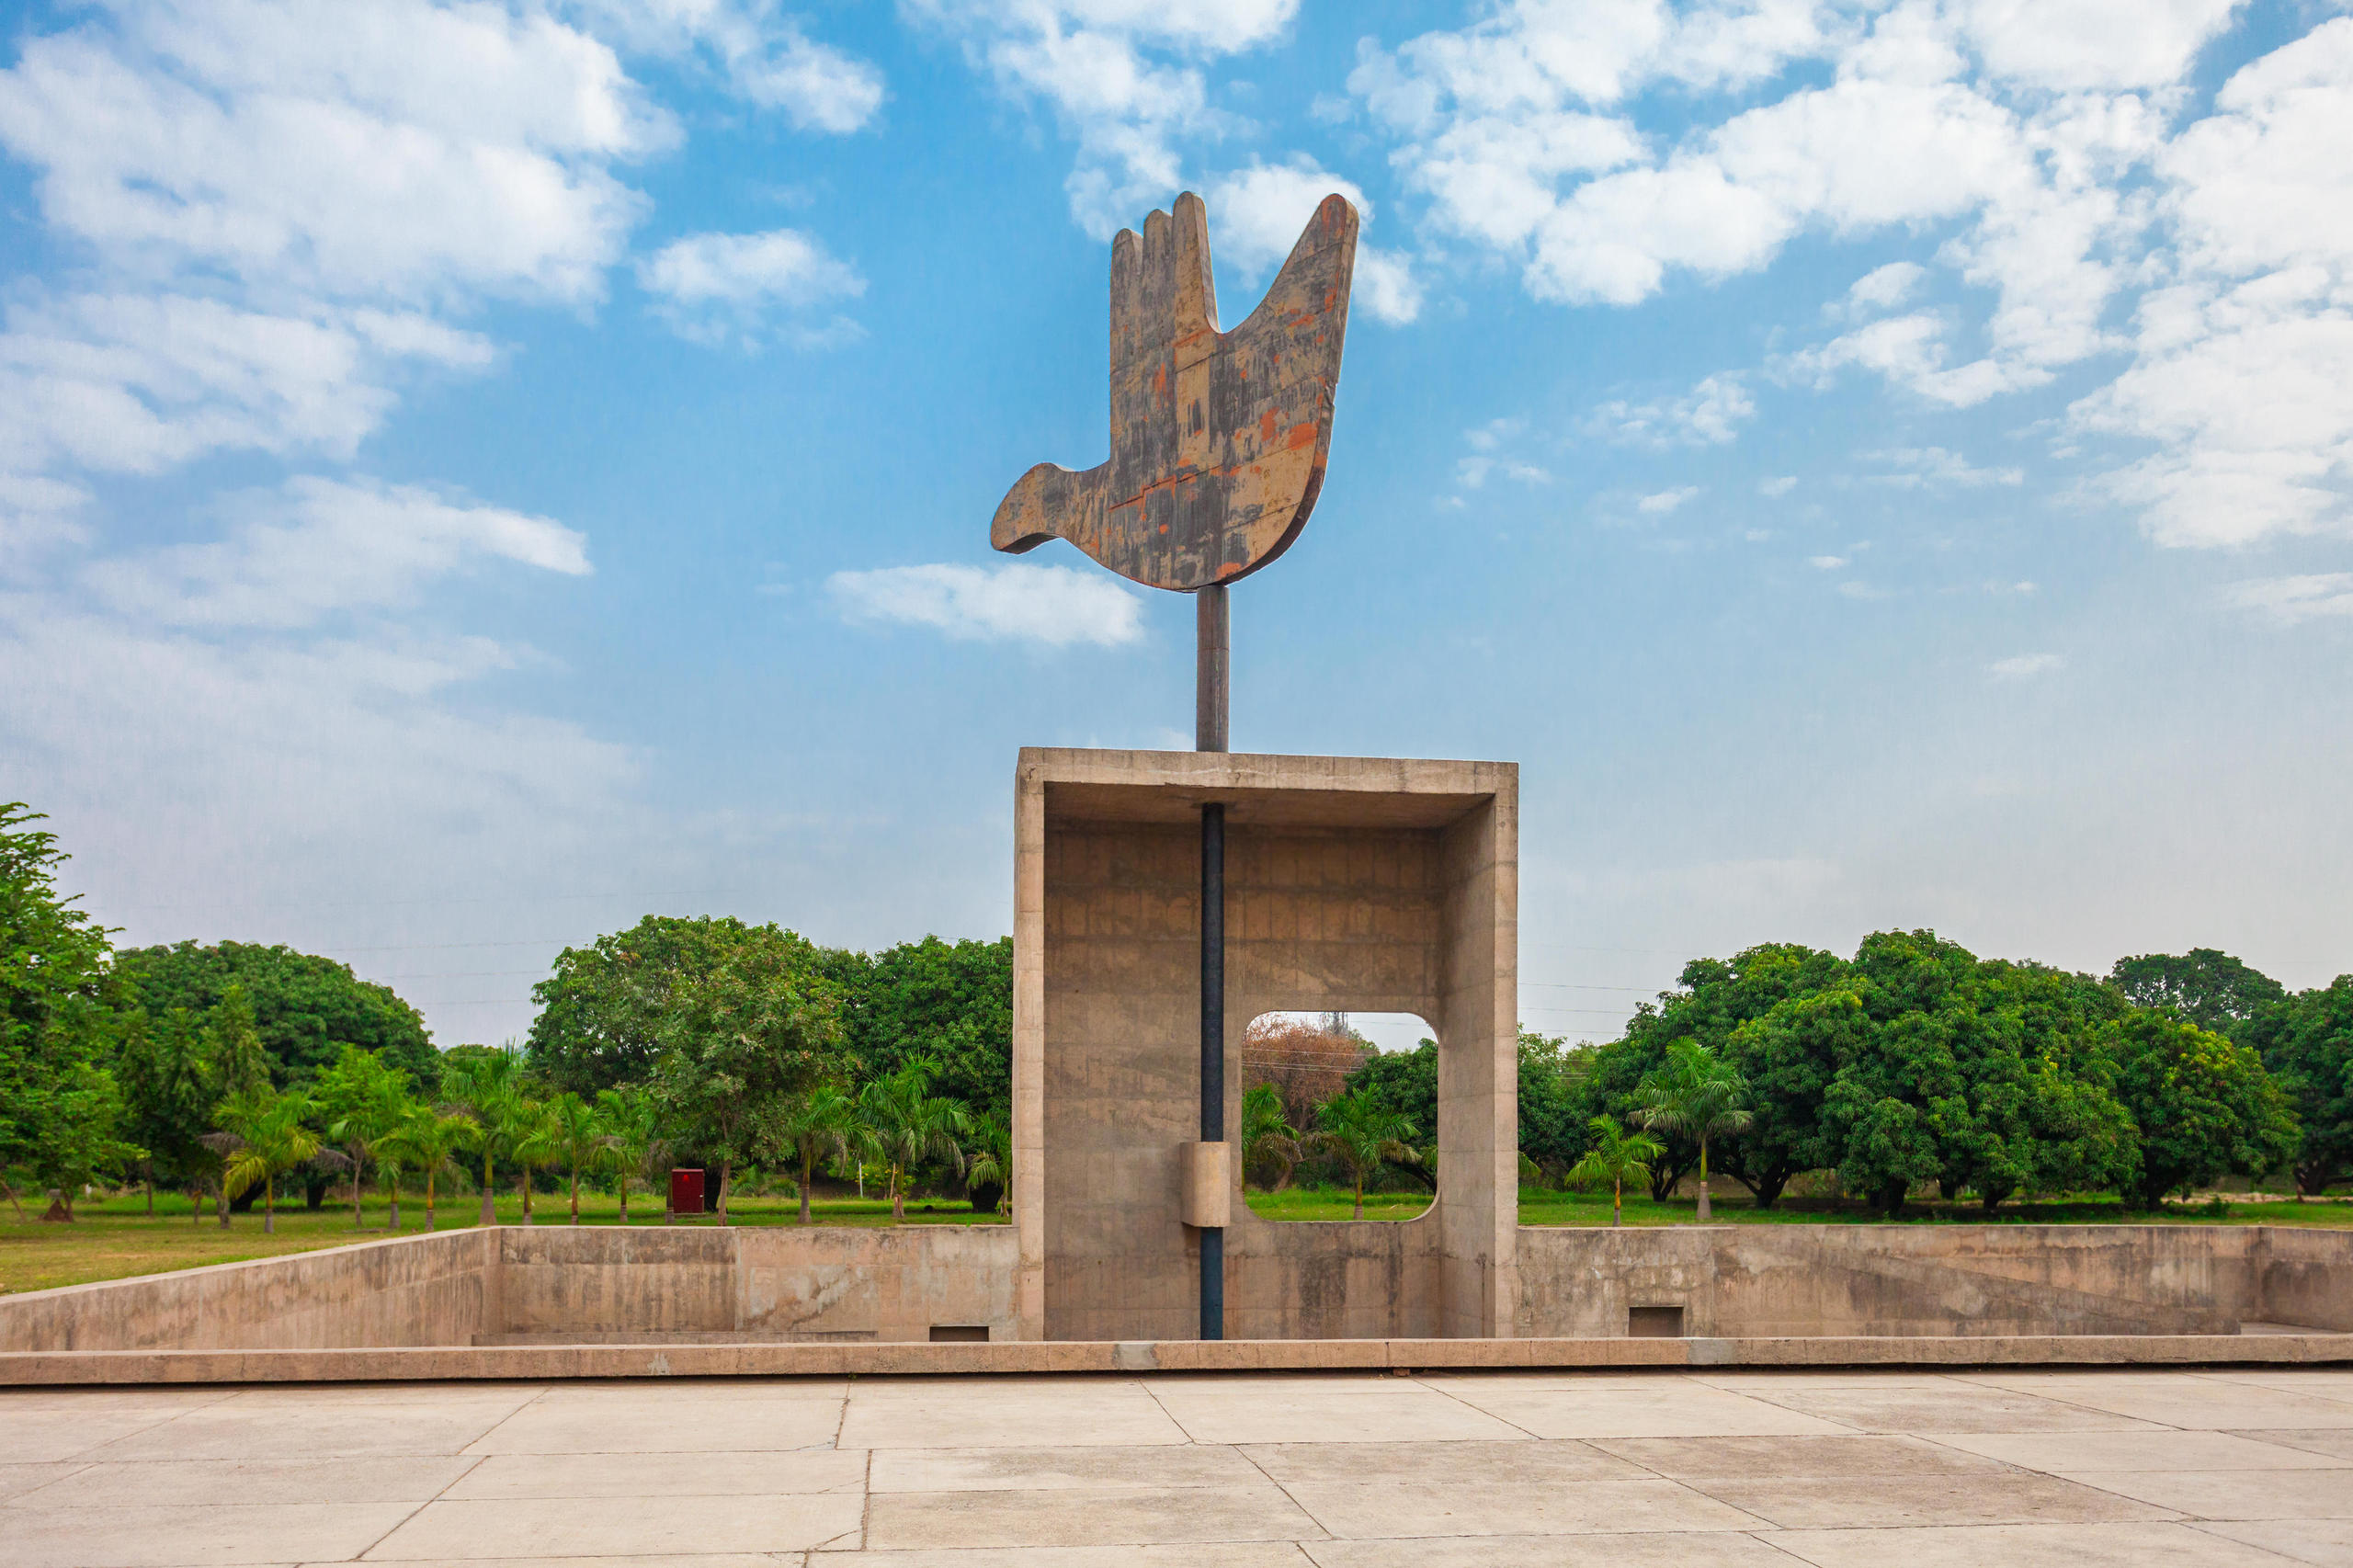 The Open Hand Monument is a symbolic structure located in the Indian Union Territory of Chandigarh,